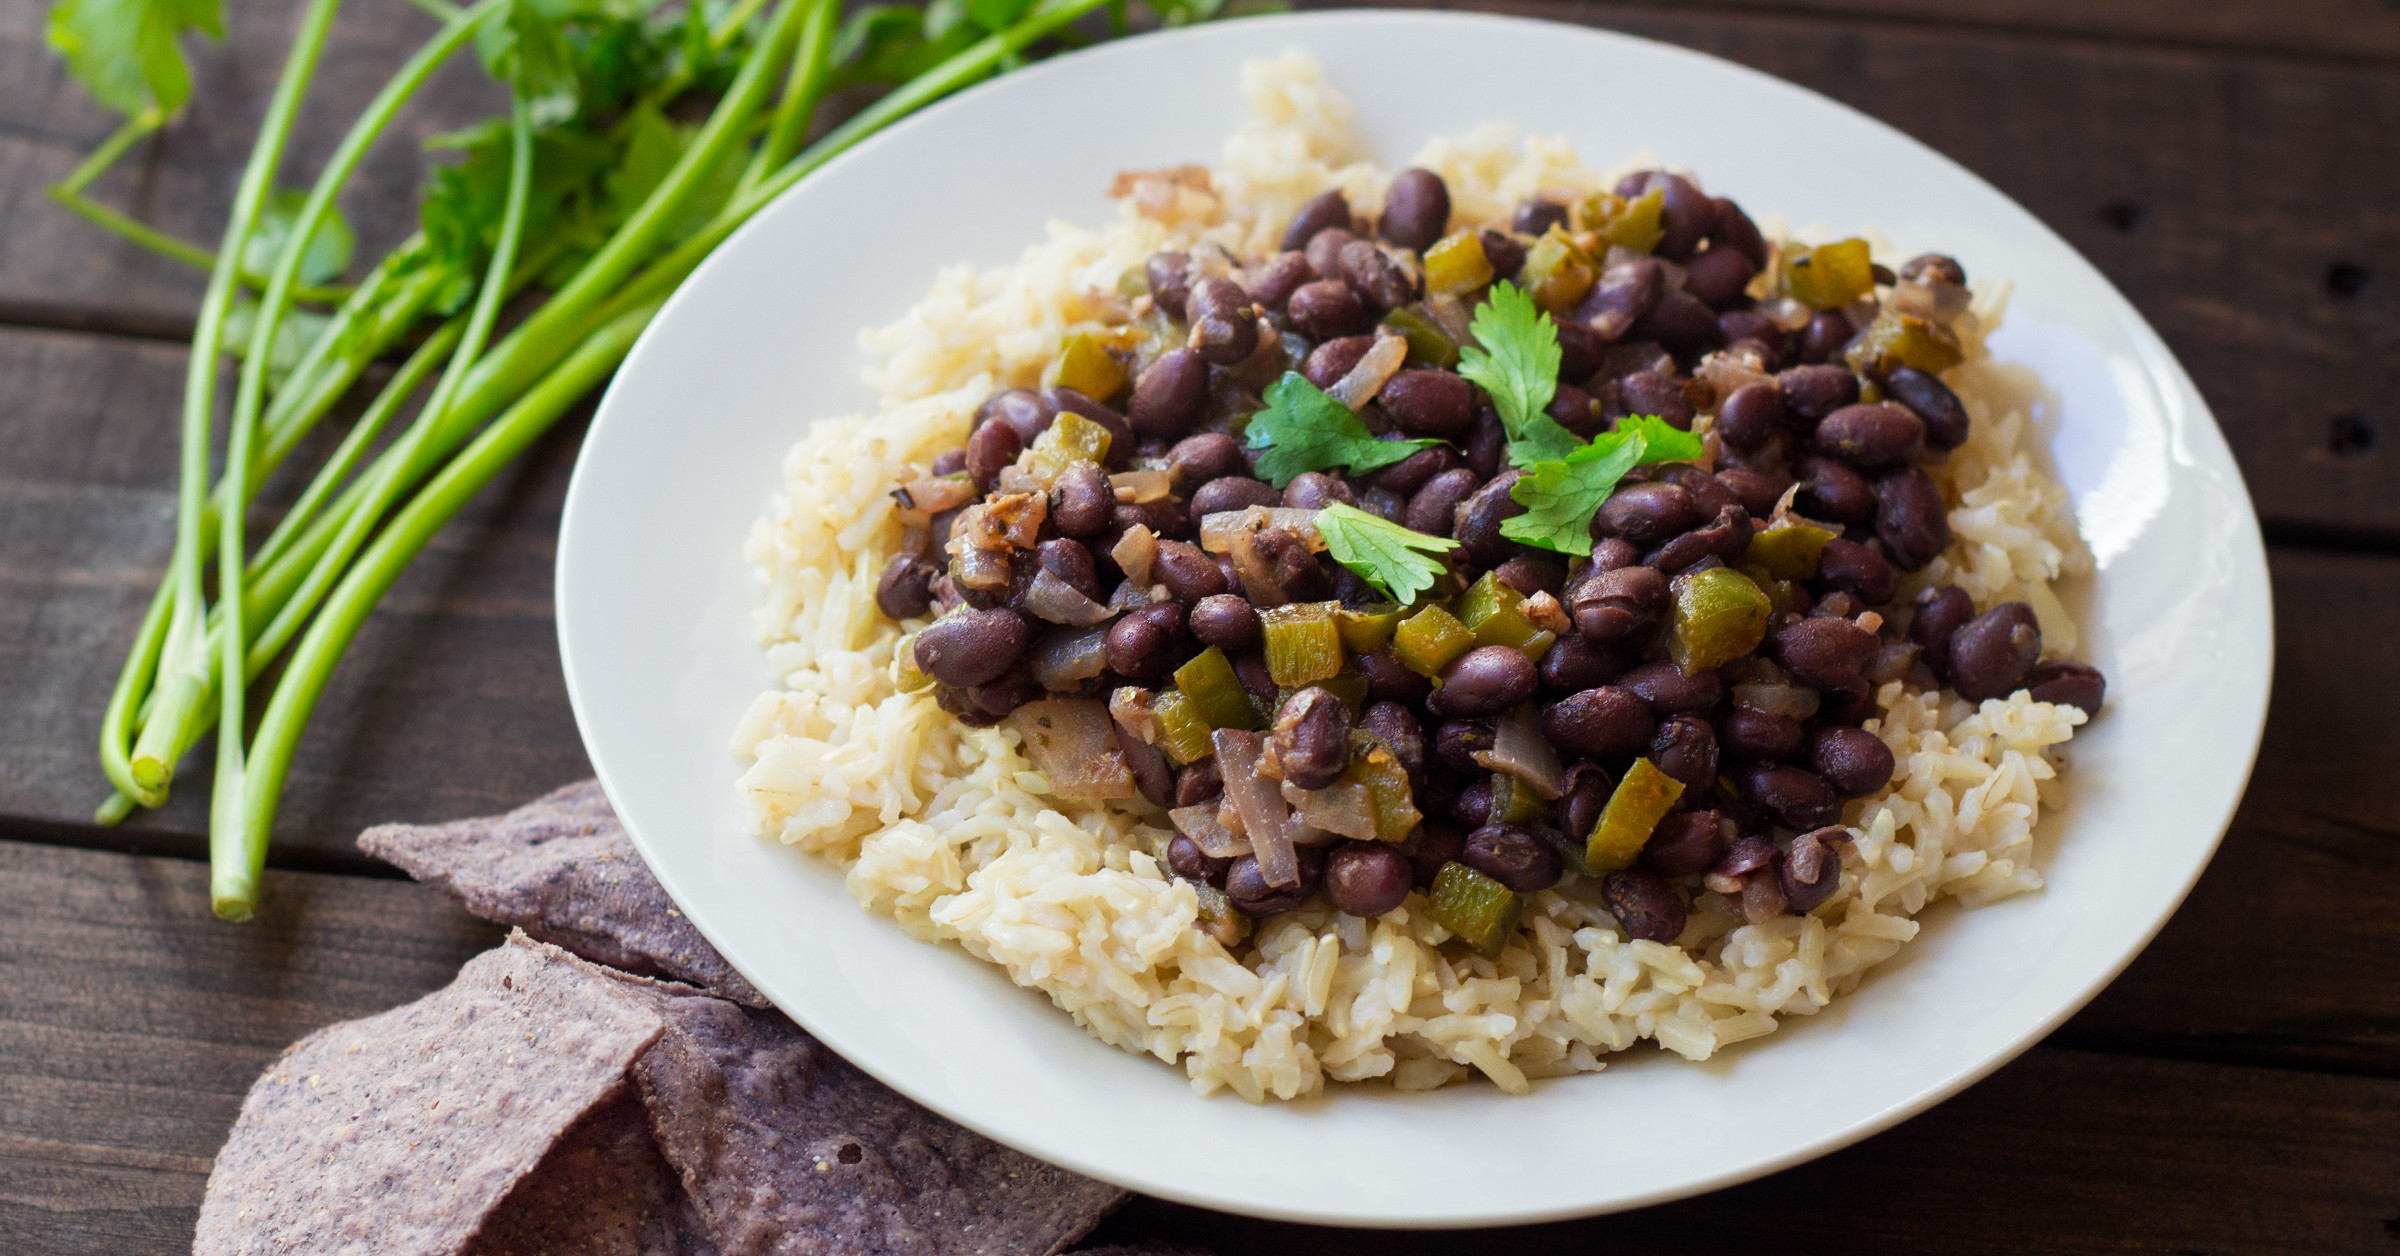 Rice And Beans Recipes
 The PERFECT Black Bean and Rice Recipe